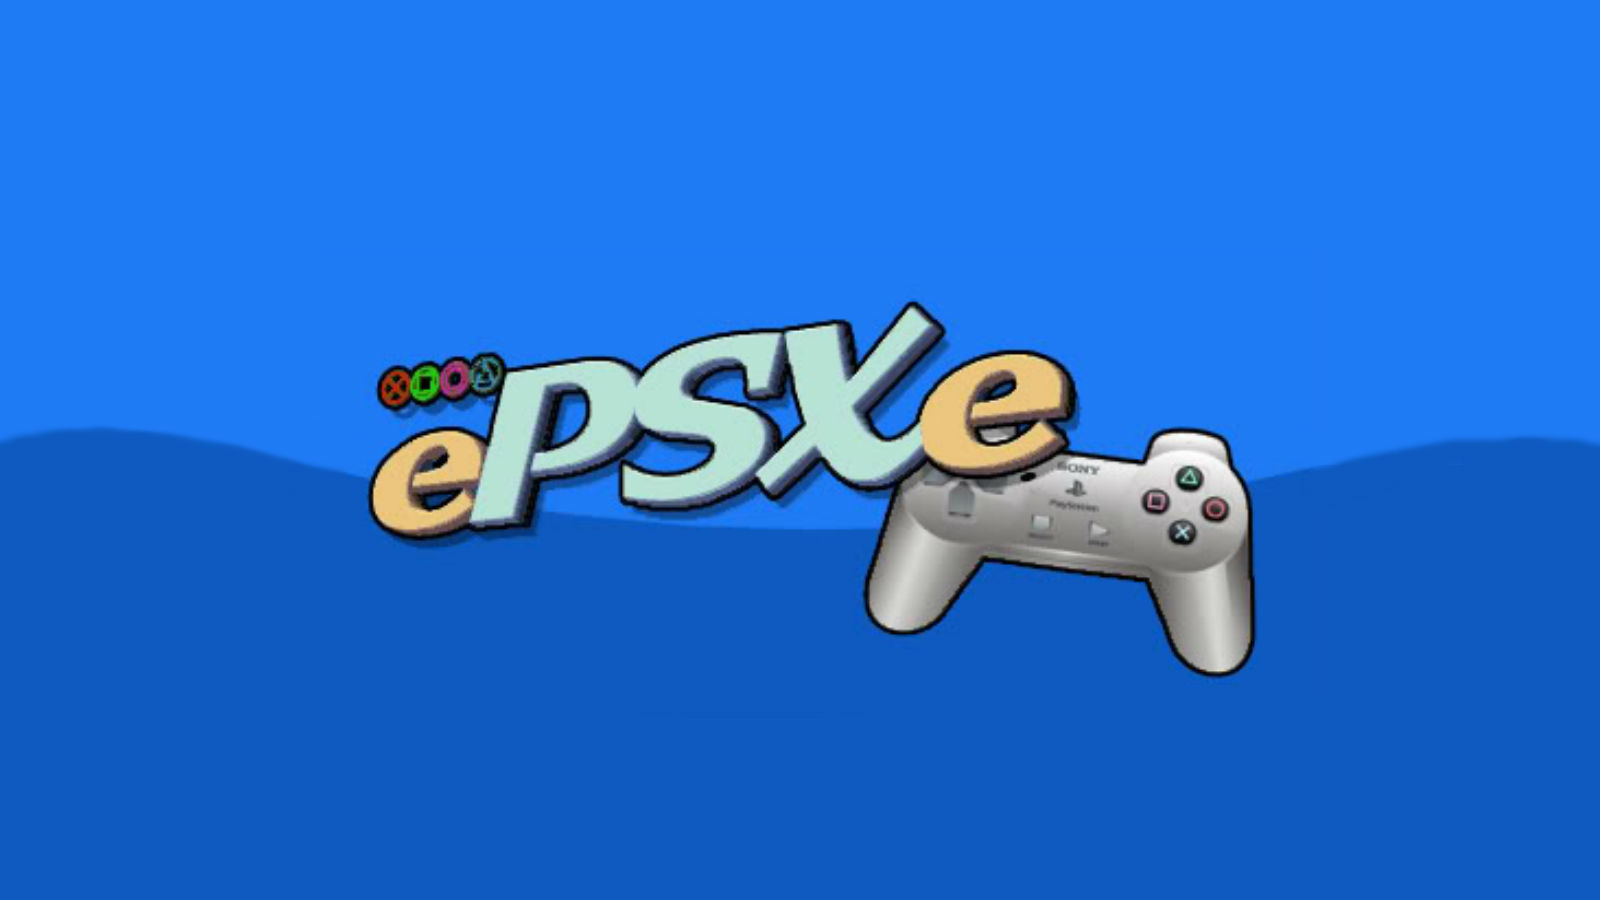 Epsxe For Android Full Version